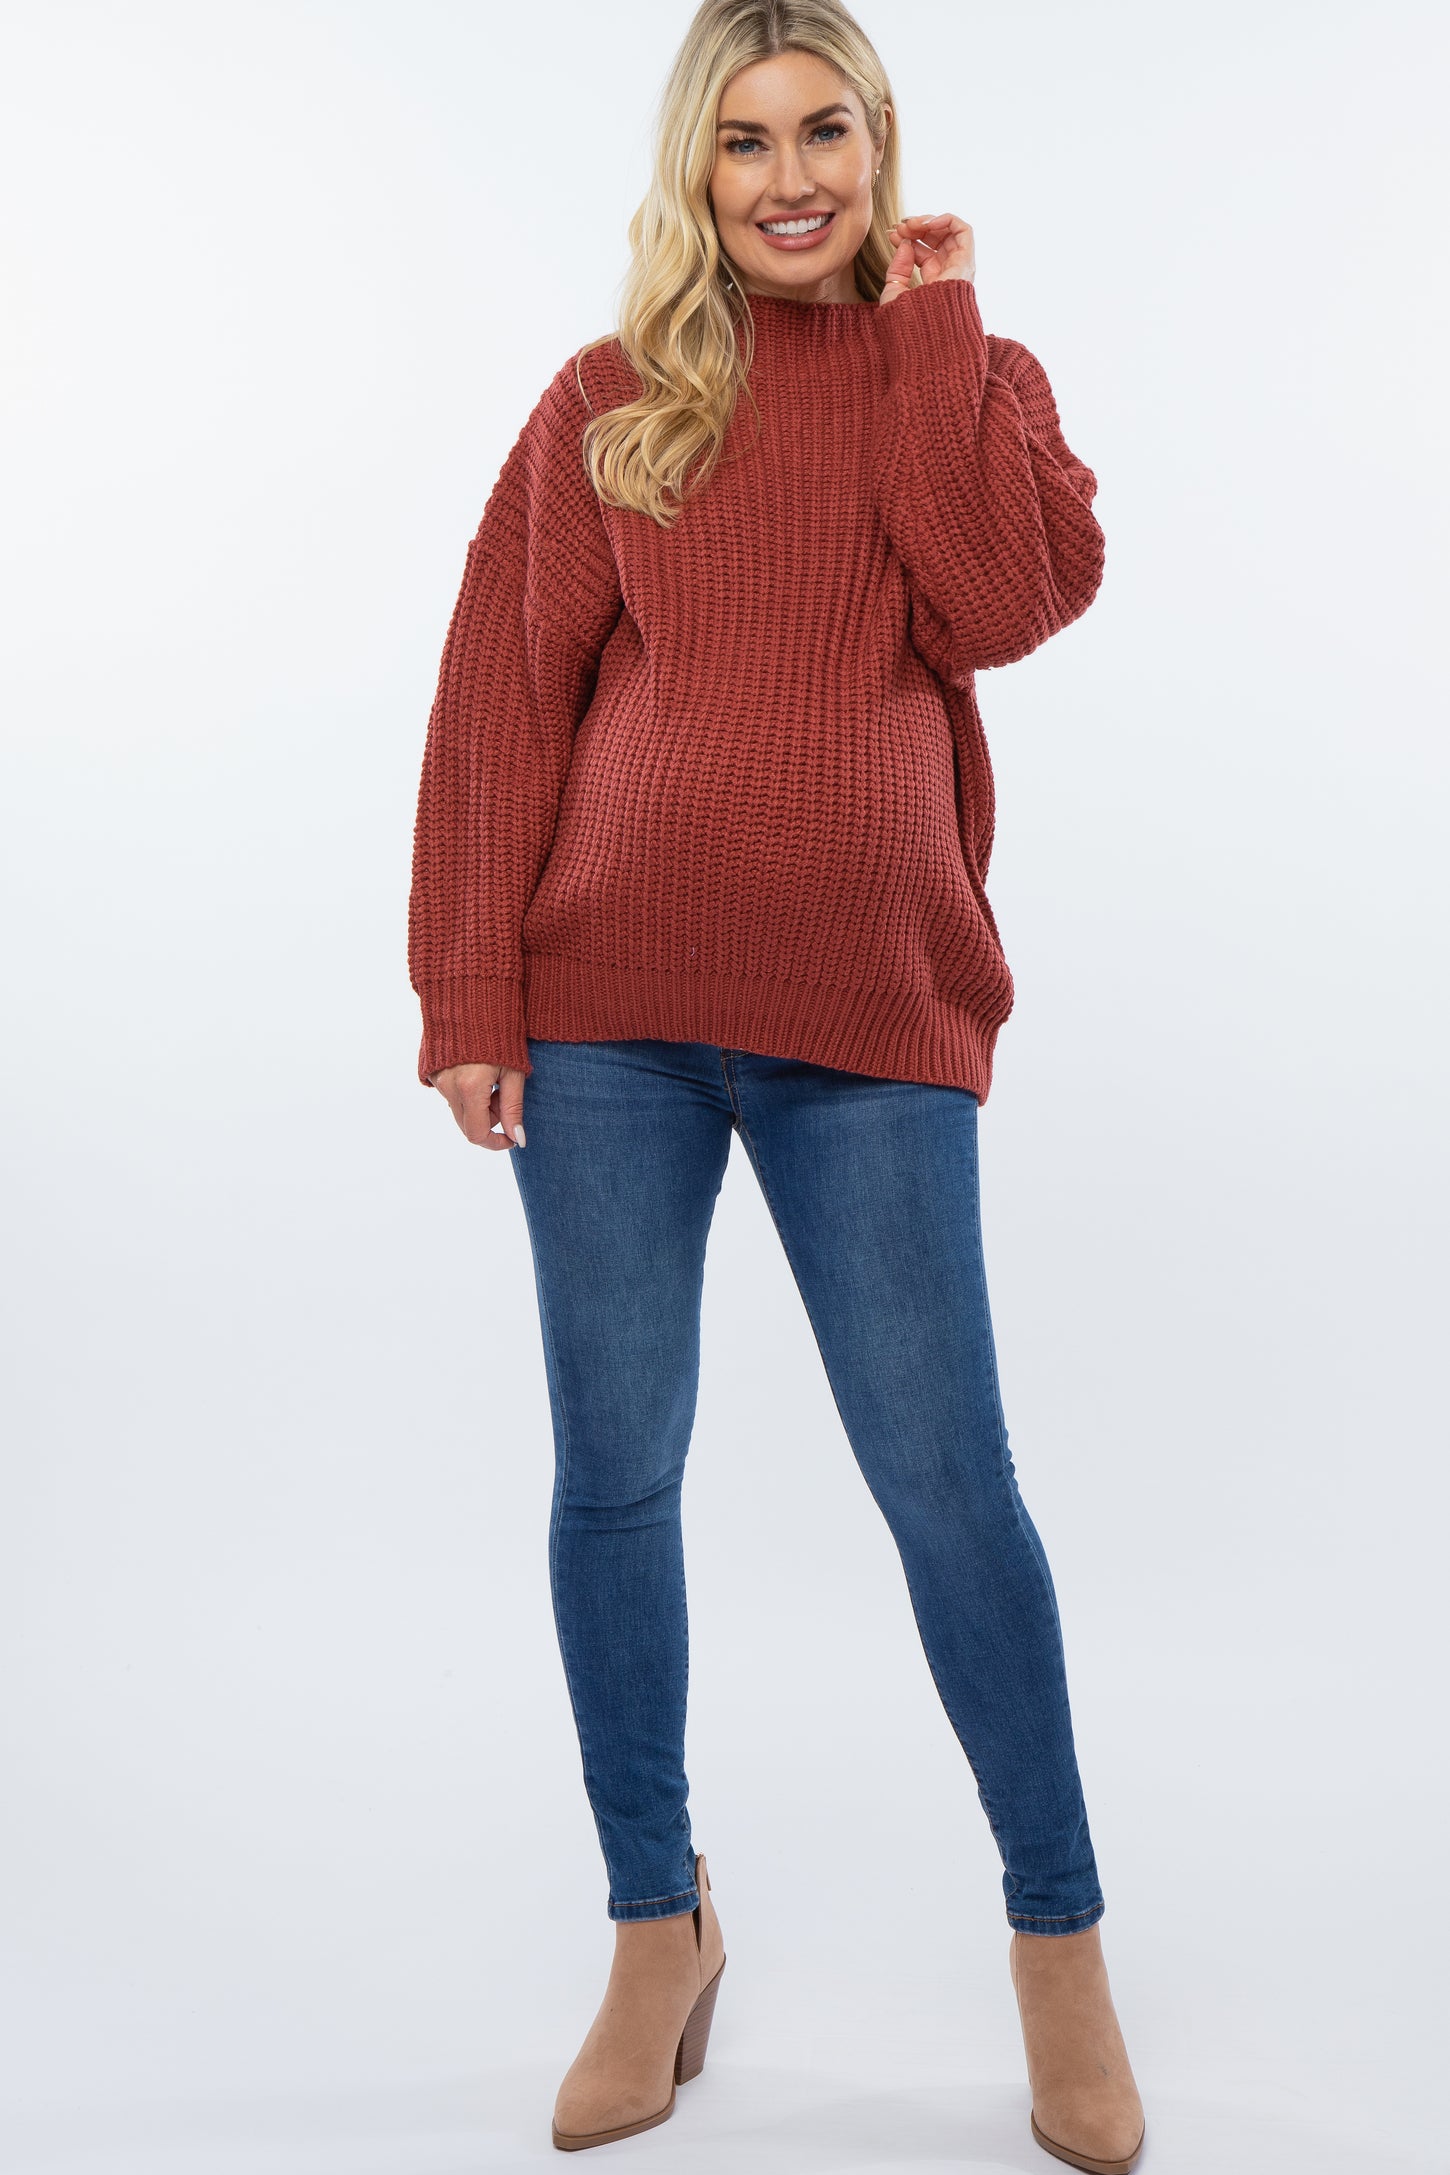 Rust Pullover Knit Mock Neck Maternity Sweater